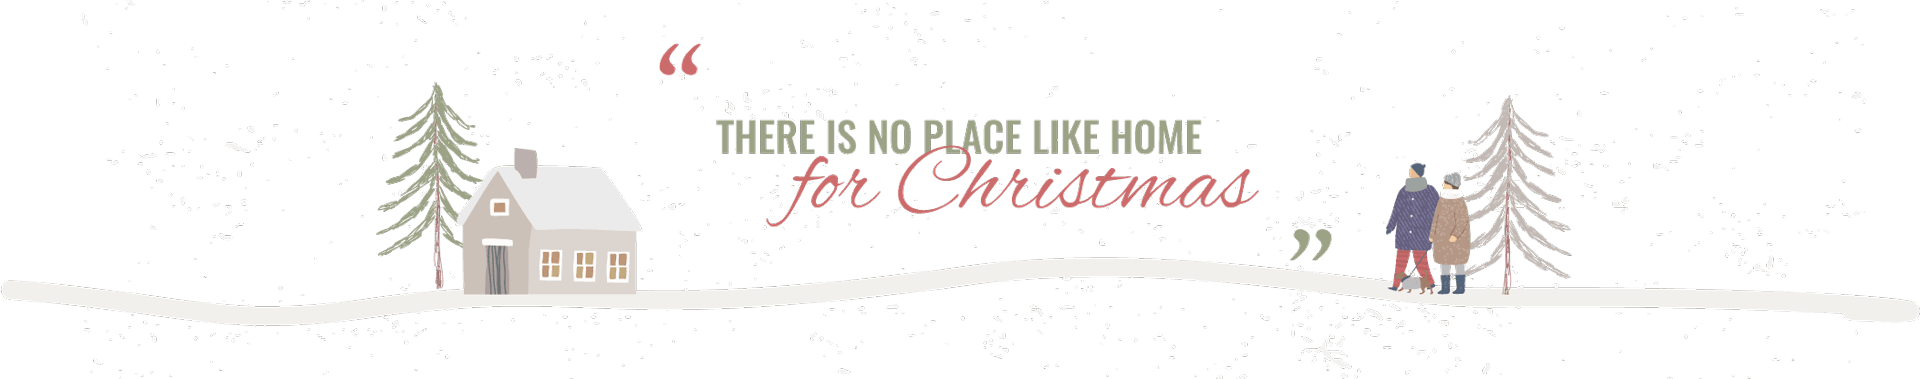 There's no place like home for Christmas